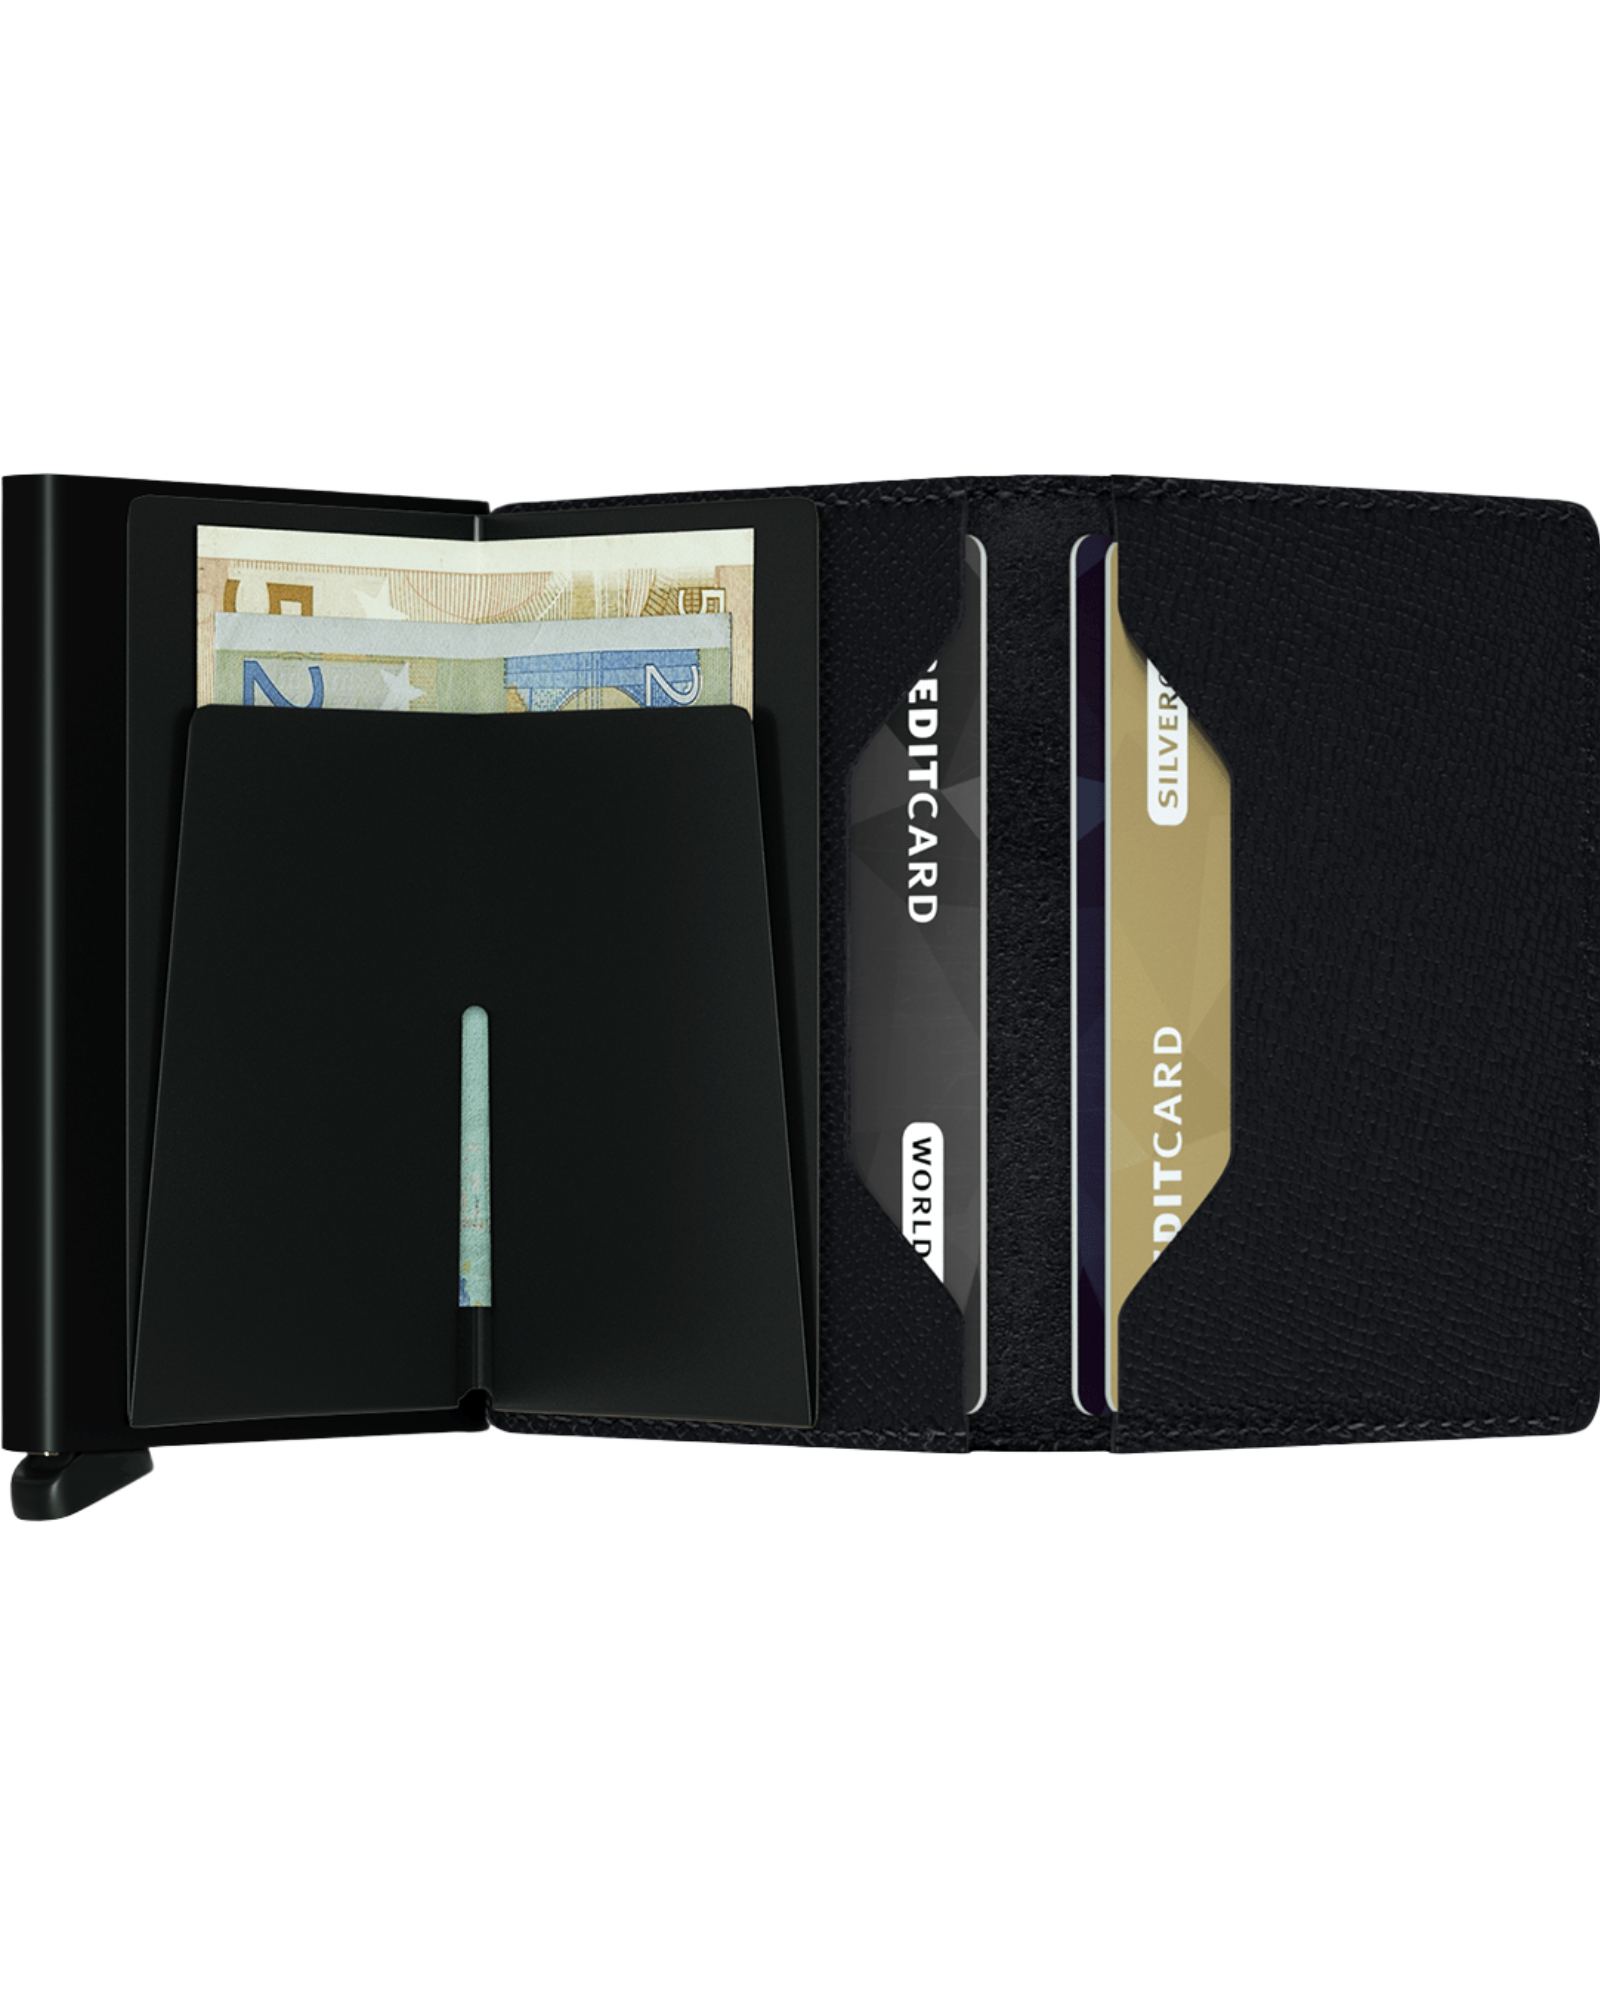 Its slim profile makes the Slimwallet fit perfectly into every pocket.